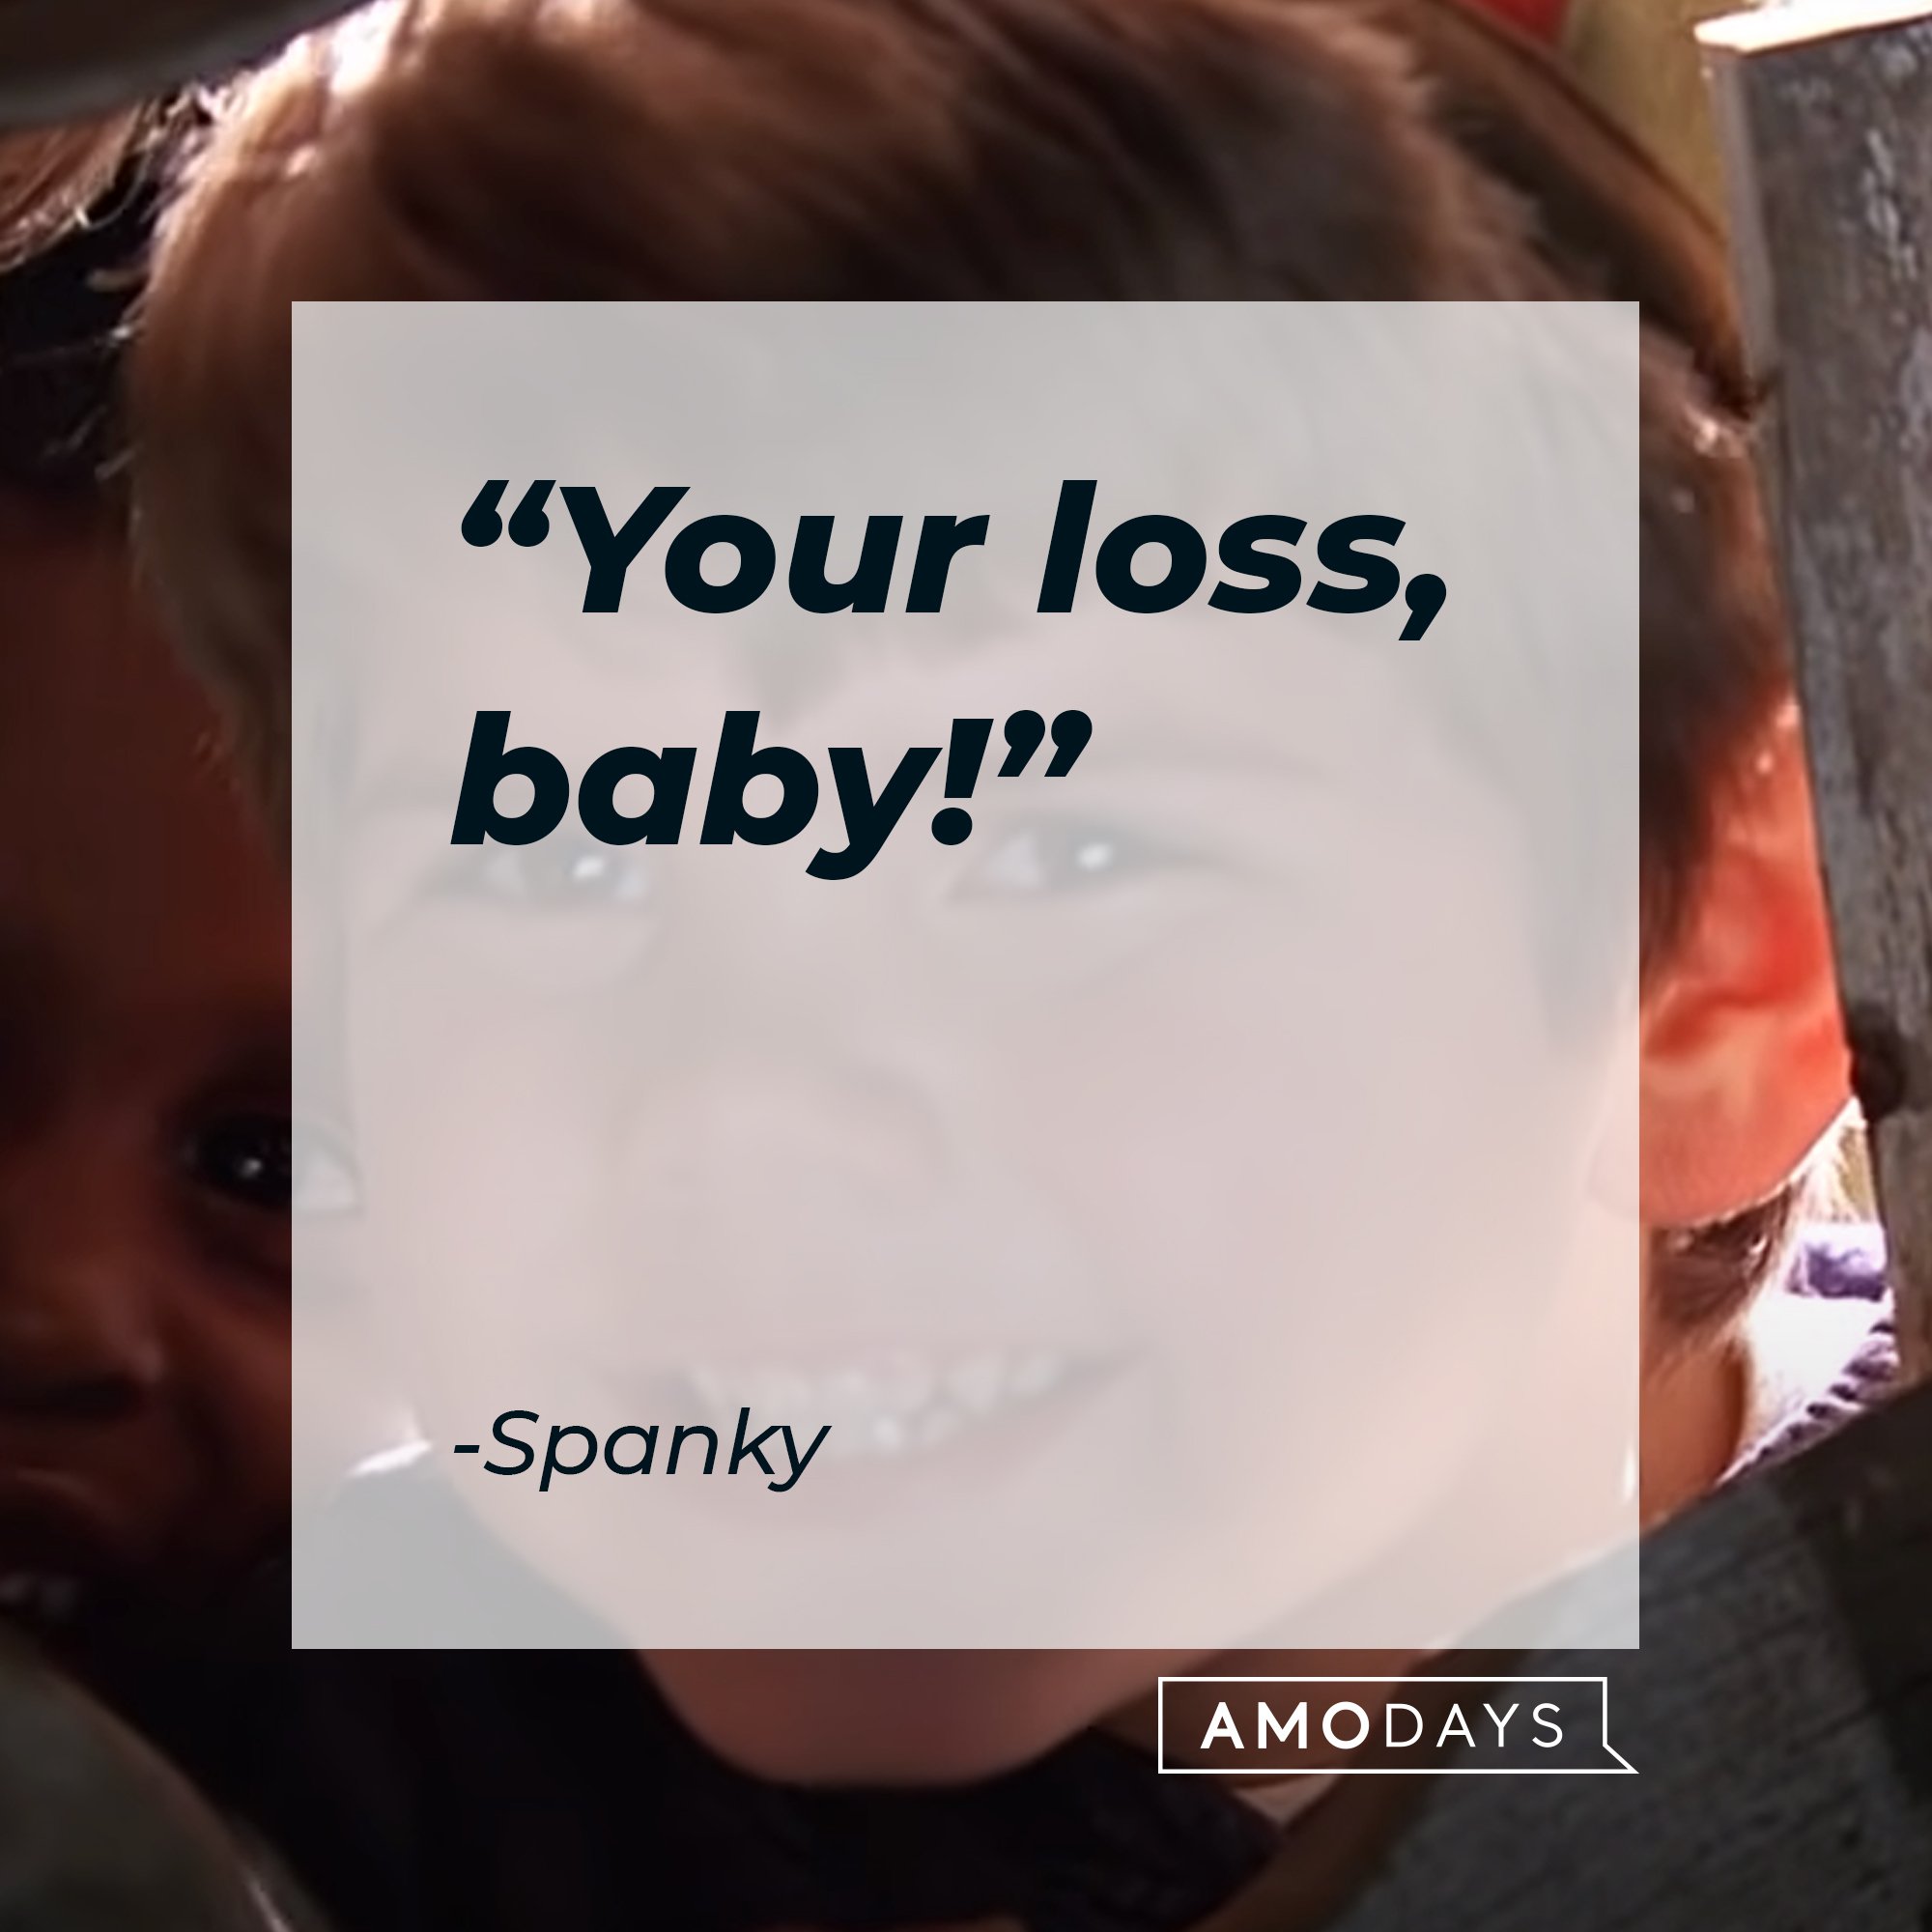 Spanky’s quote: "Your loss, baby!" | Image: AmoDays